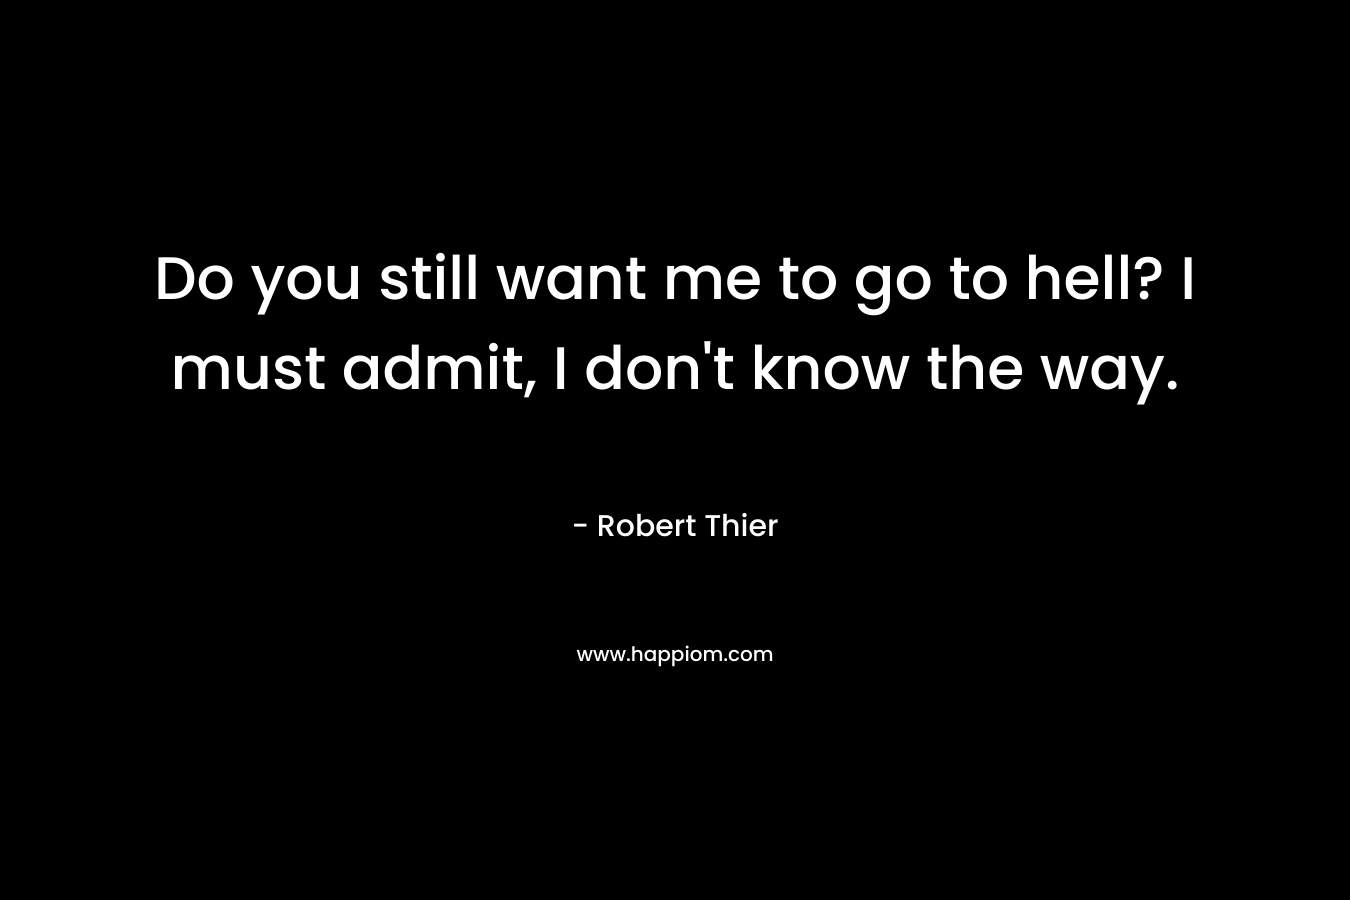 Do you still want me to go to hell? I must admit, I don’t know the way. – Robert Thier